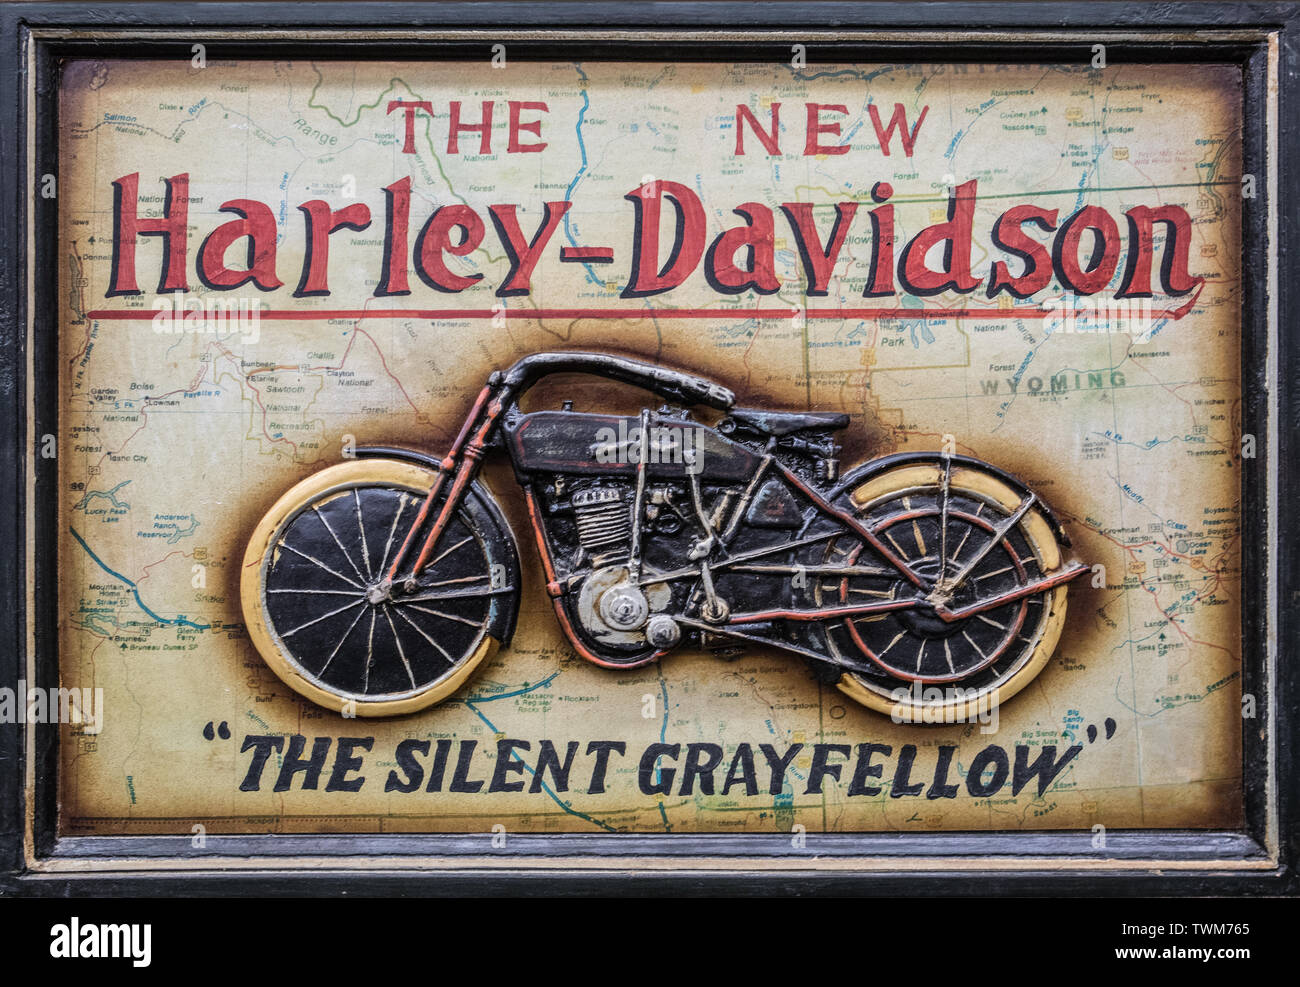 Harley Davidson Poster High Resolution Stock Photography And Images Alamy